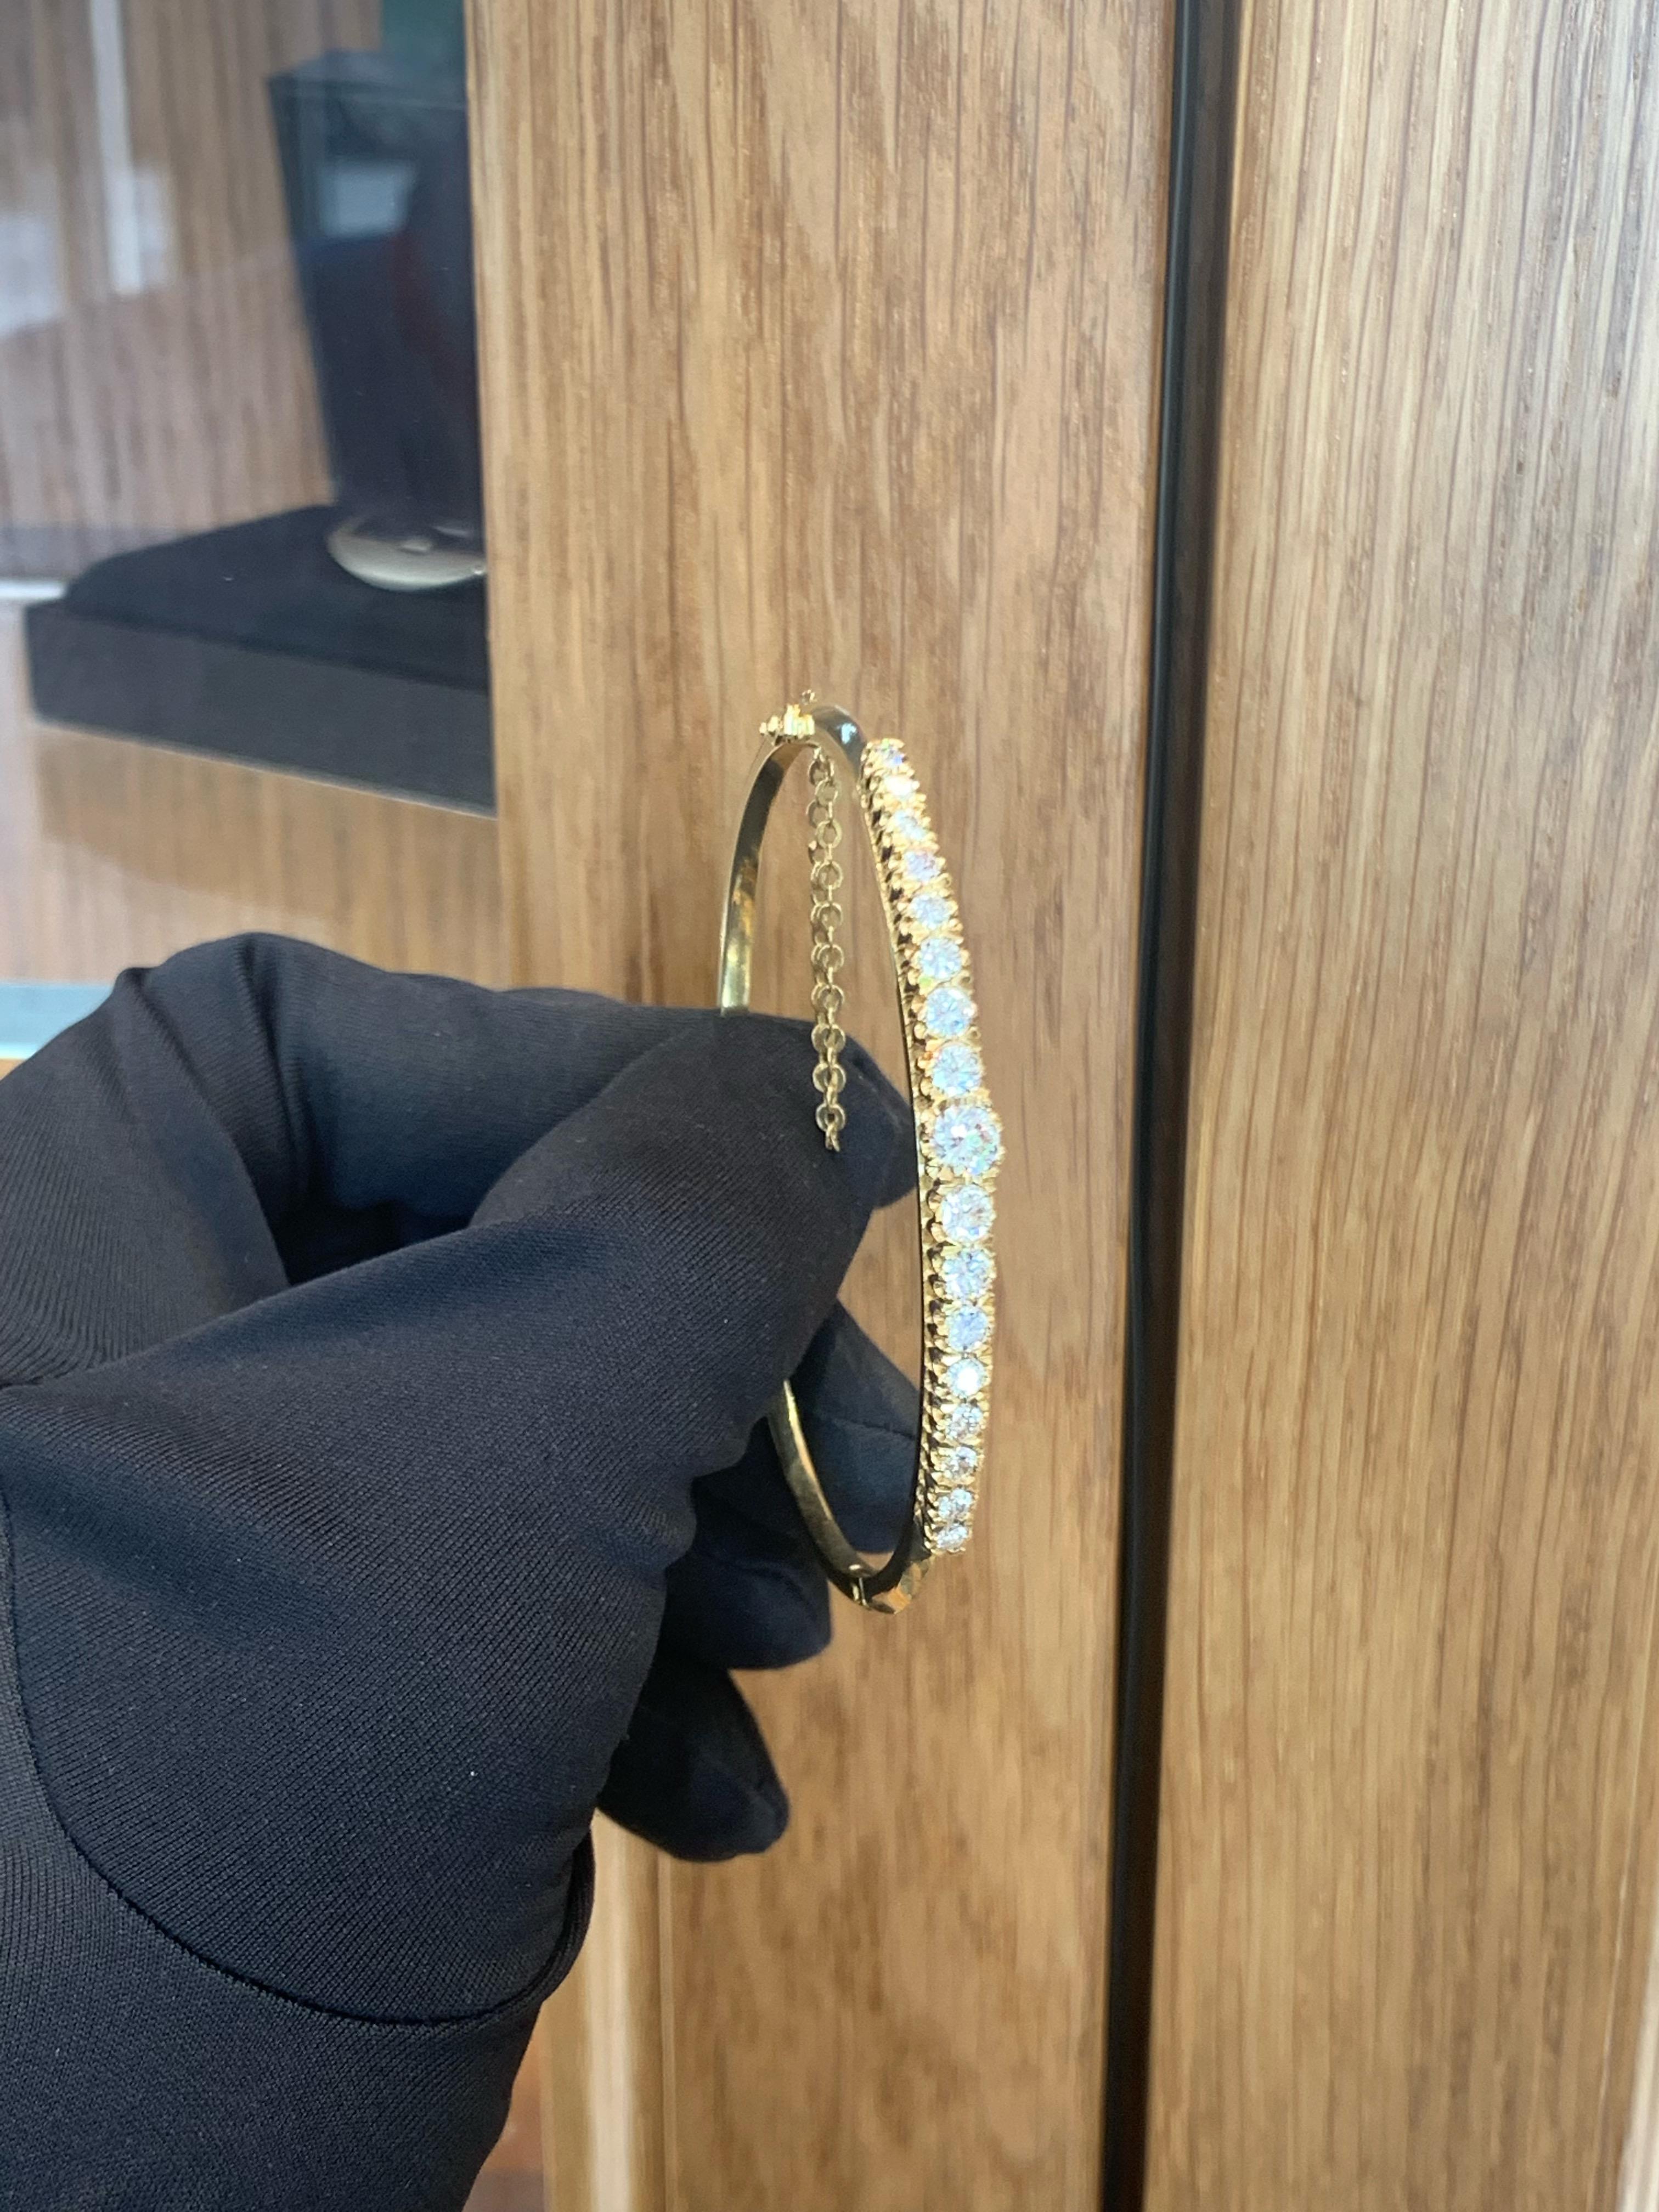 18k Gold 5.0 Carats Diamond Bangle Bracelet In Excellent Condition For Sale In Ramat Gan, IL